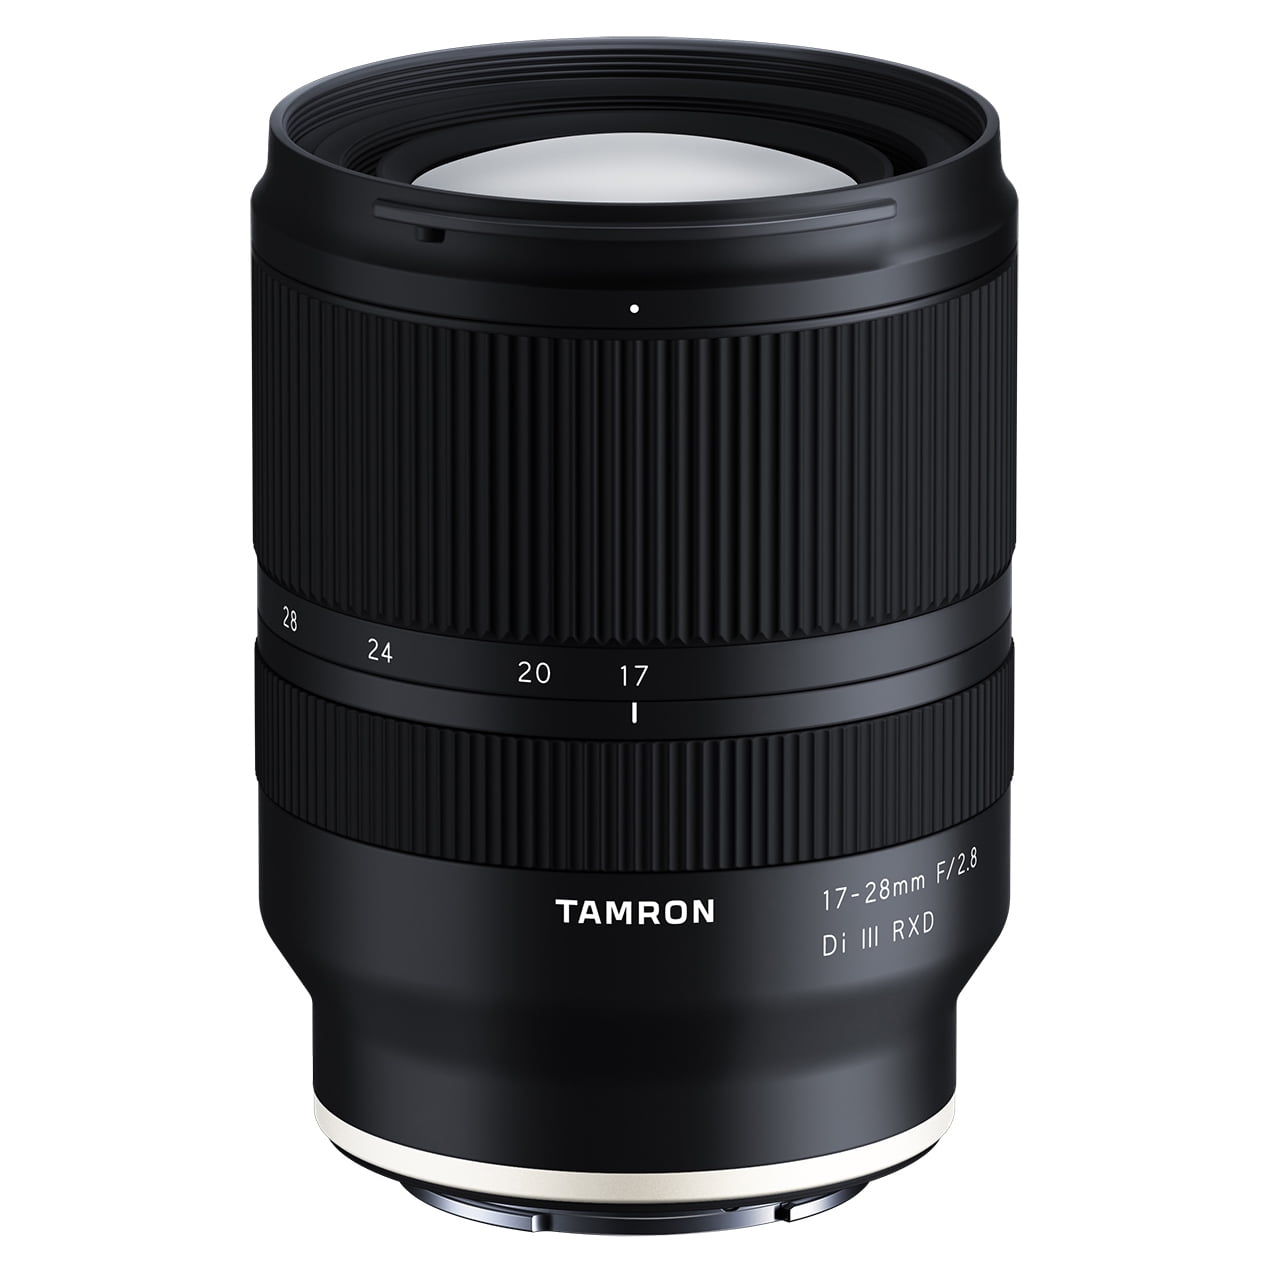 Tamron 17-28mm f/2.8 Di III RXD Lens for Sony E